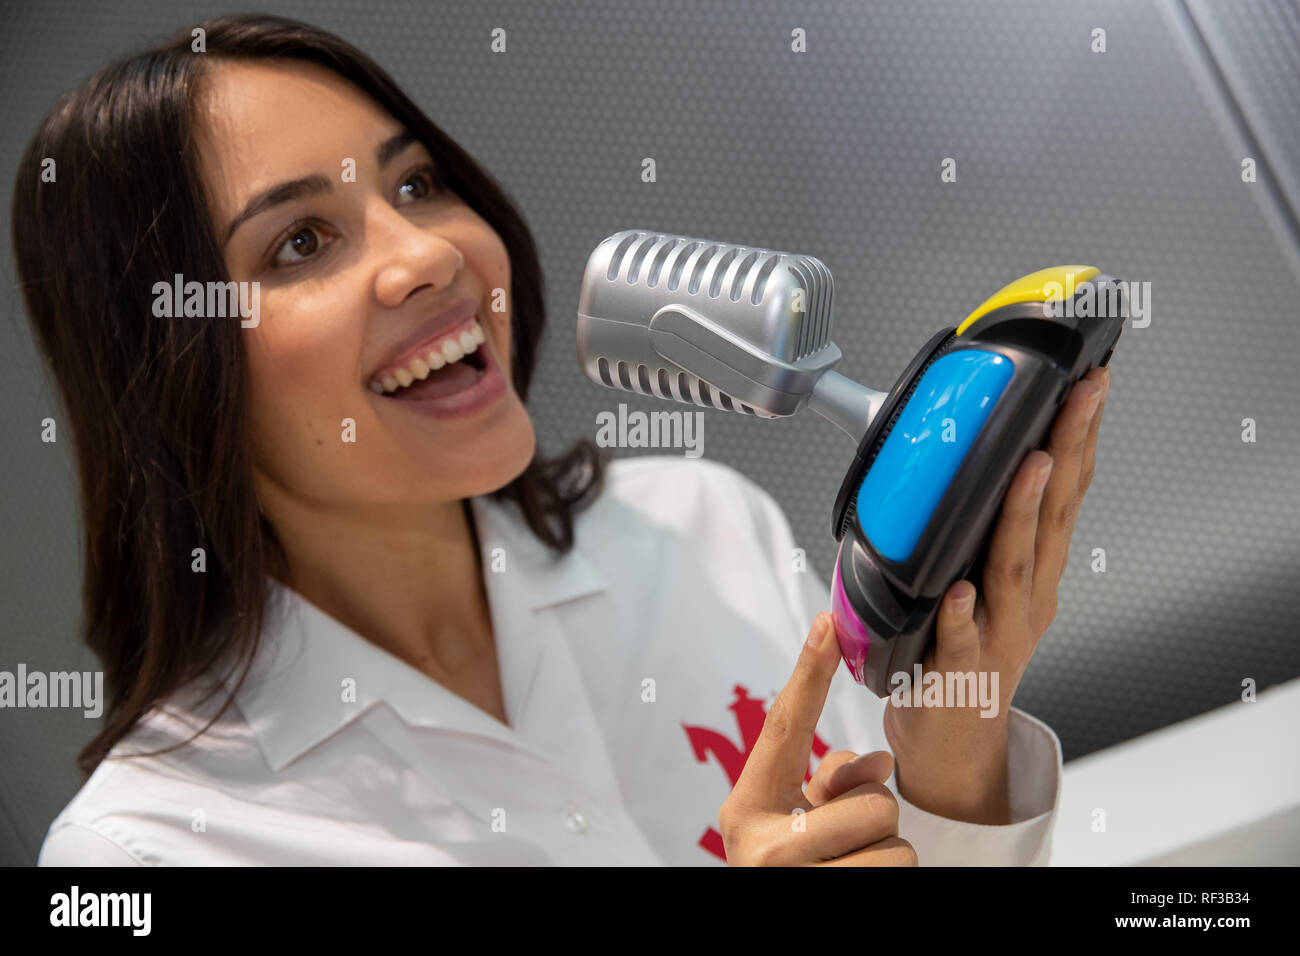 Numberg, Germany. 24th Jan, 2019. Model Jennifer presents Hutter's Sound Jack at the press conference for the International Toy Fair 2019 in the Exhibition Centre Nuremberg. In the game, players are asked to answer questions on over 400 snippets of sound. The toy is nominated in the category 'Startup' for the 'Toy Award'. The world's largest toy fair takes place this year from 30 January to 03 February 2019. Photo: Daniel Karmann/dpa Credit: dpa picture alliance/Alamy Live News Stock Photo